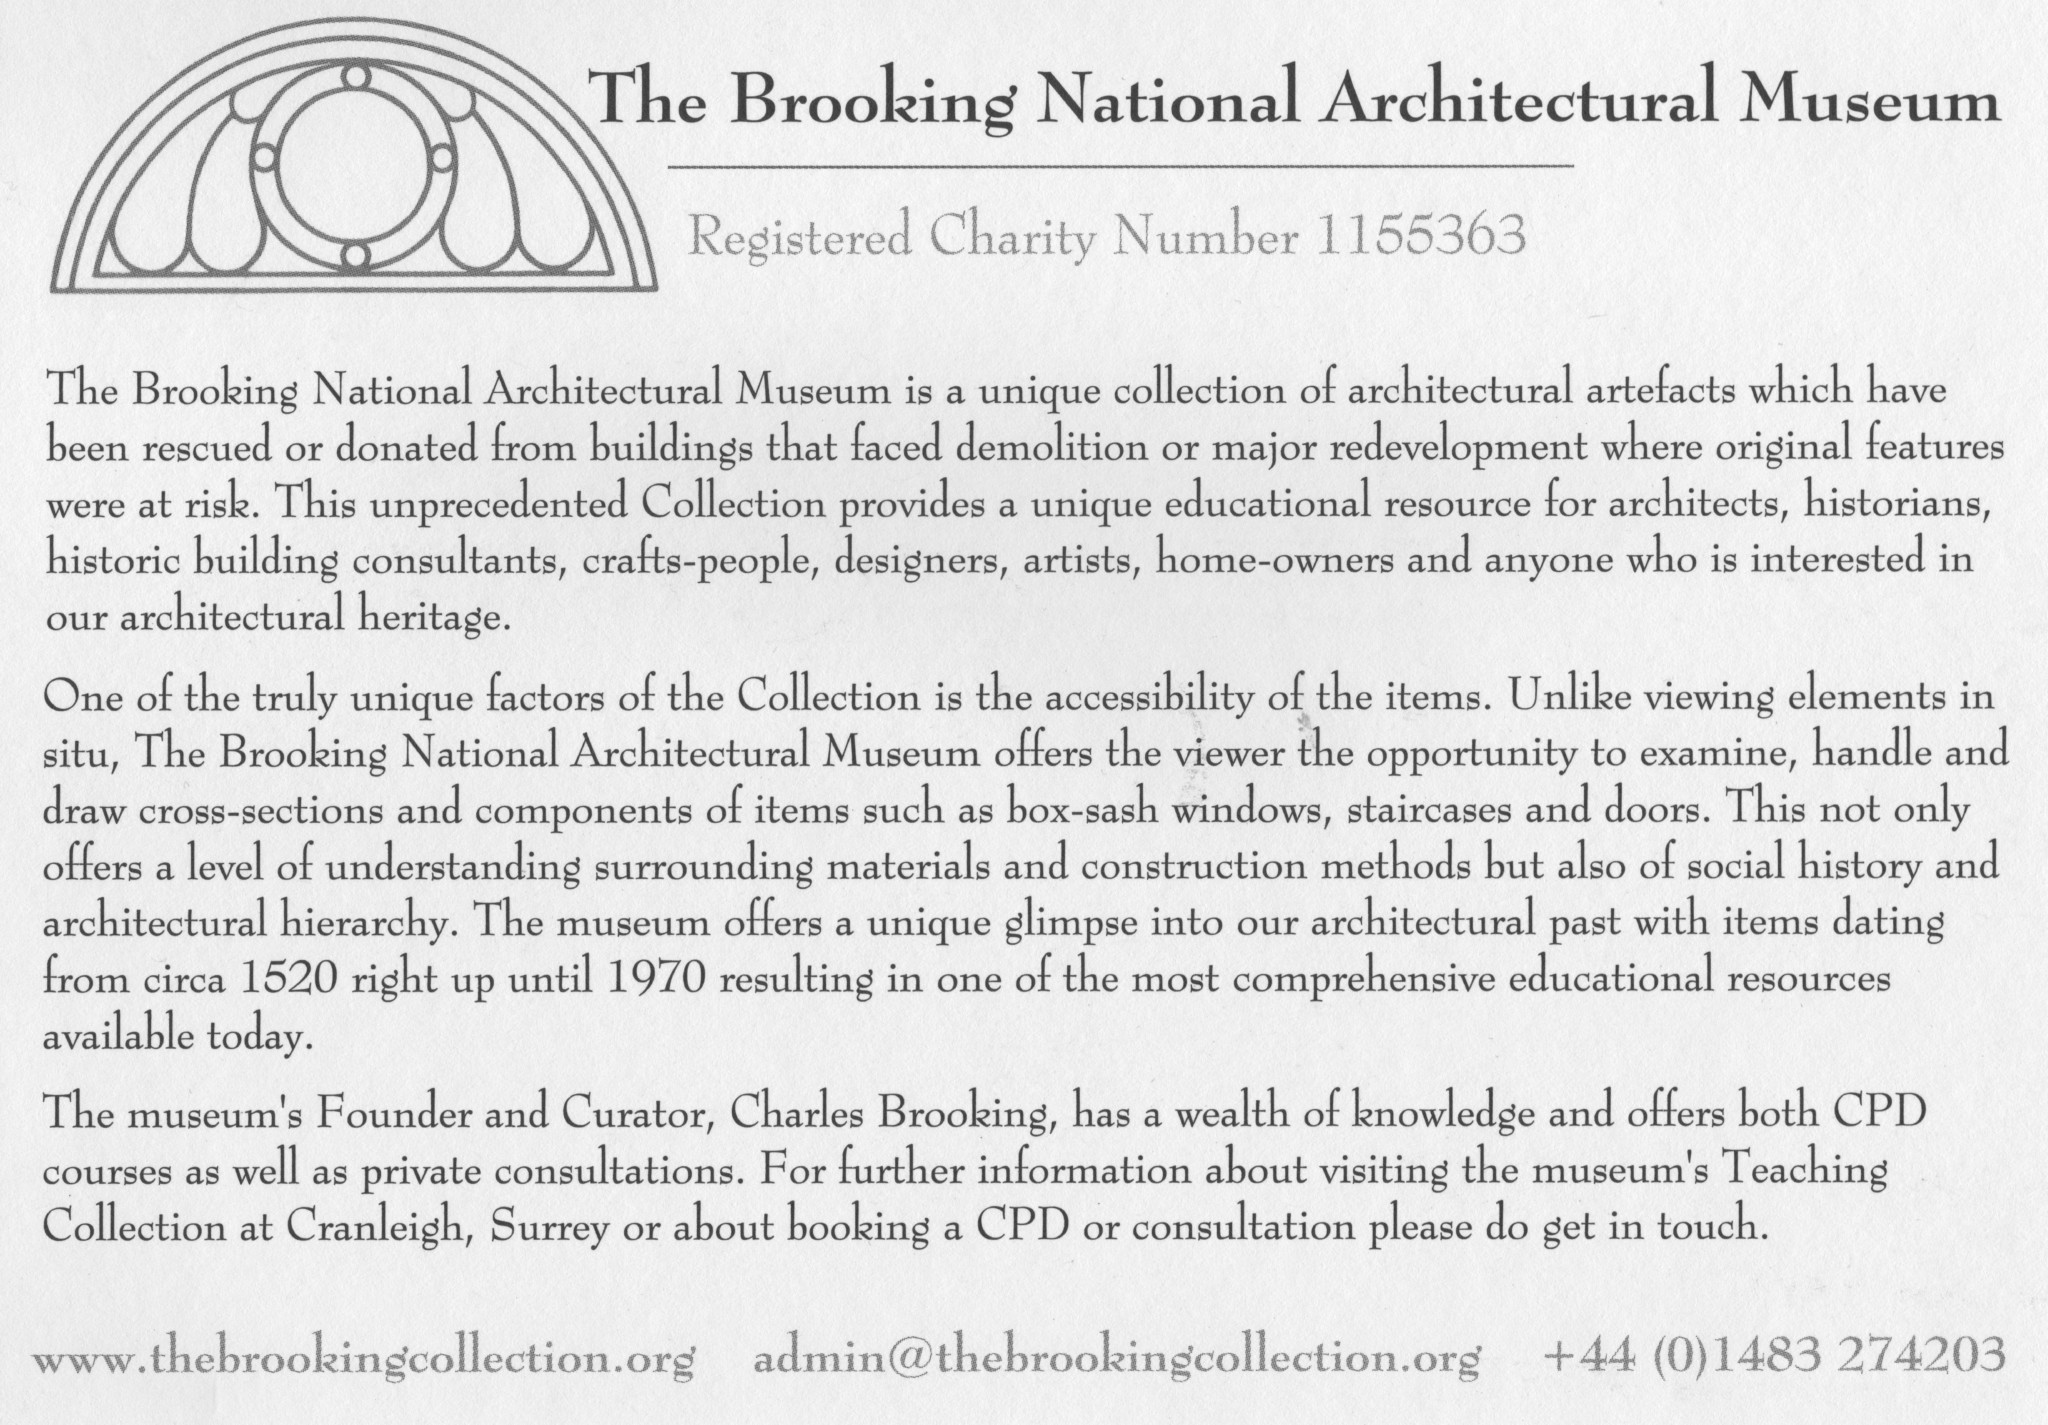 The Brooking collection